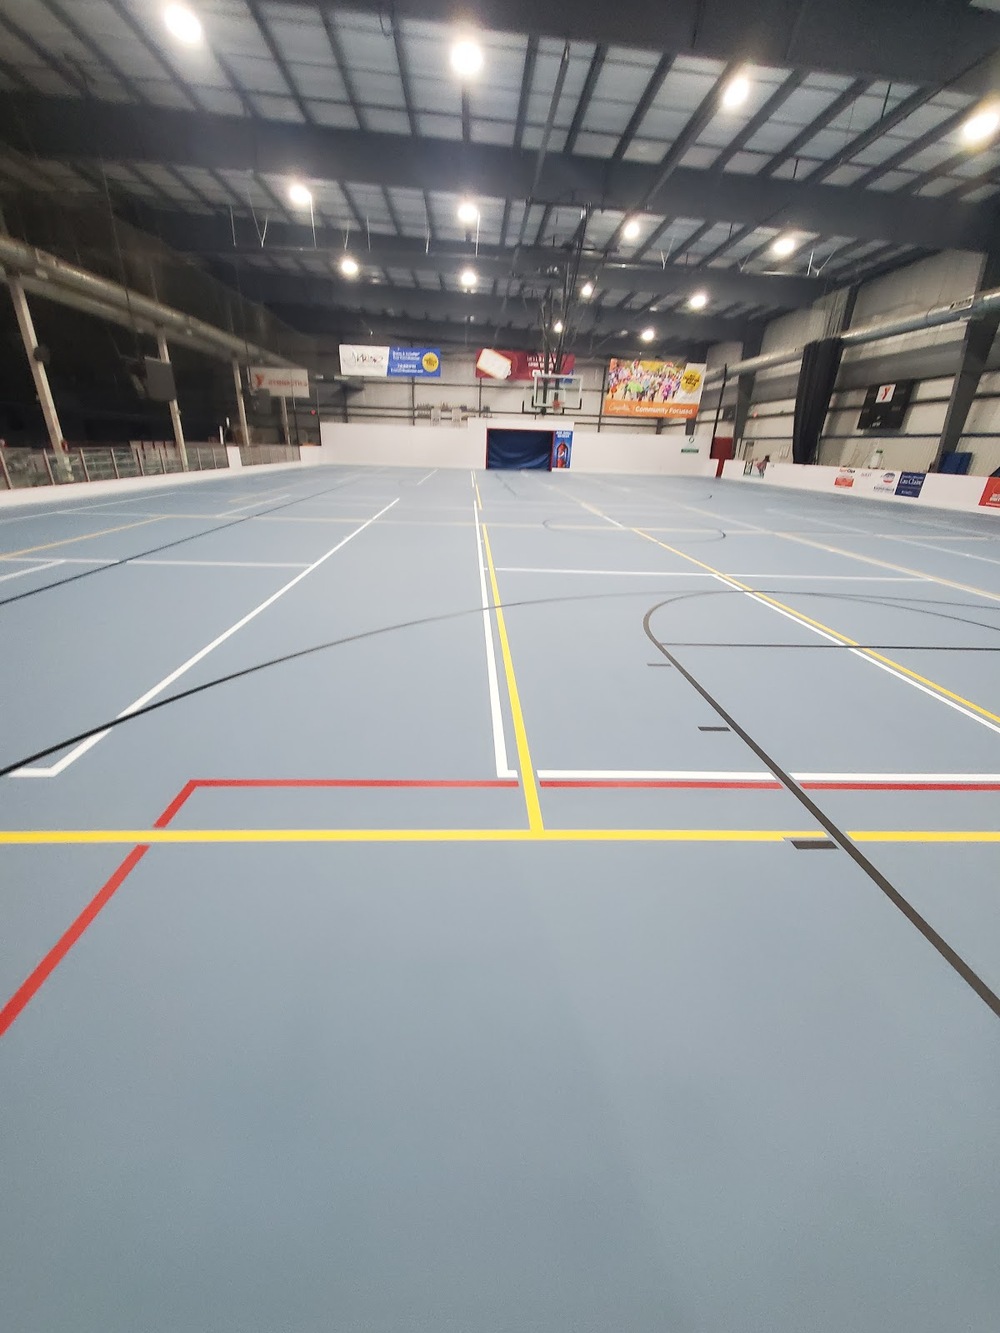 Play Pickleball at Eau Claire Indoor Sports Center: Court Information